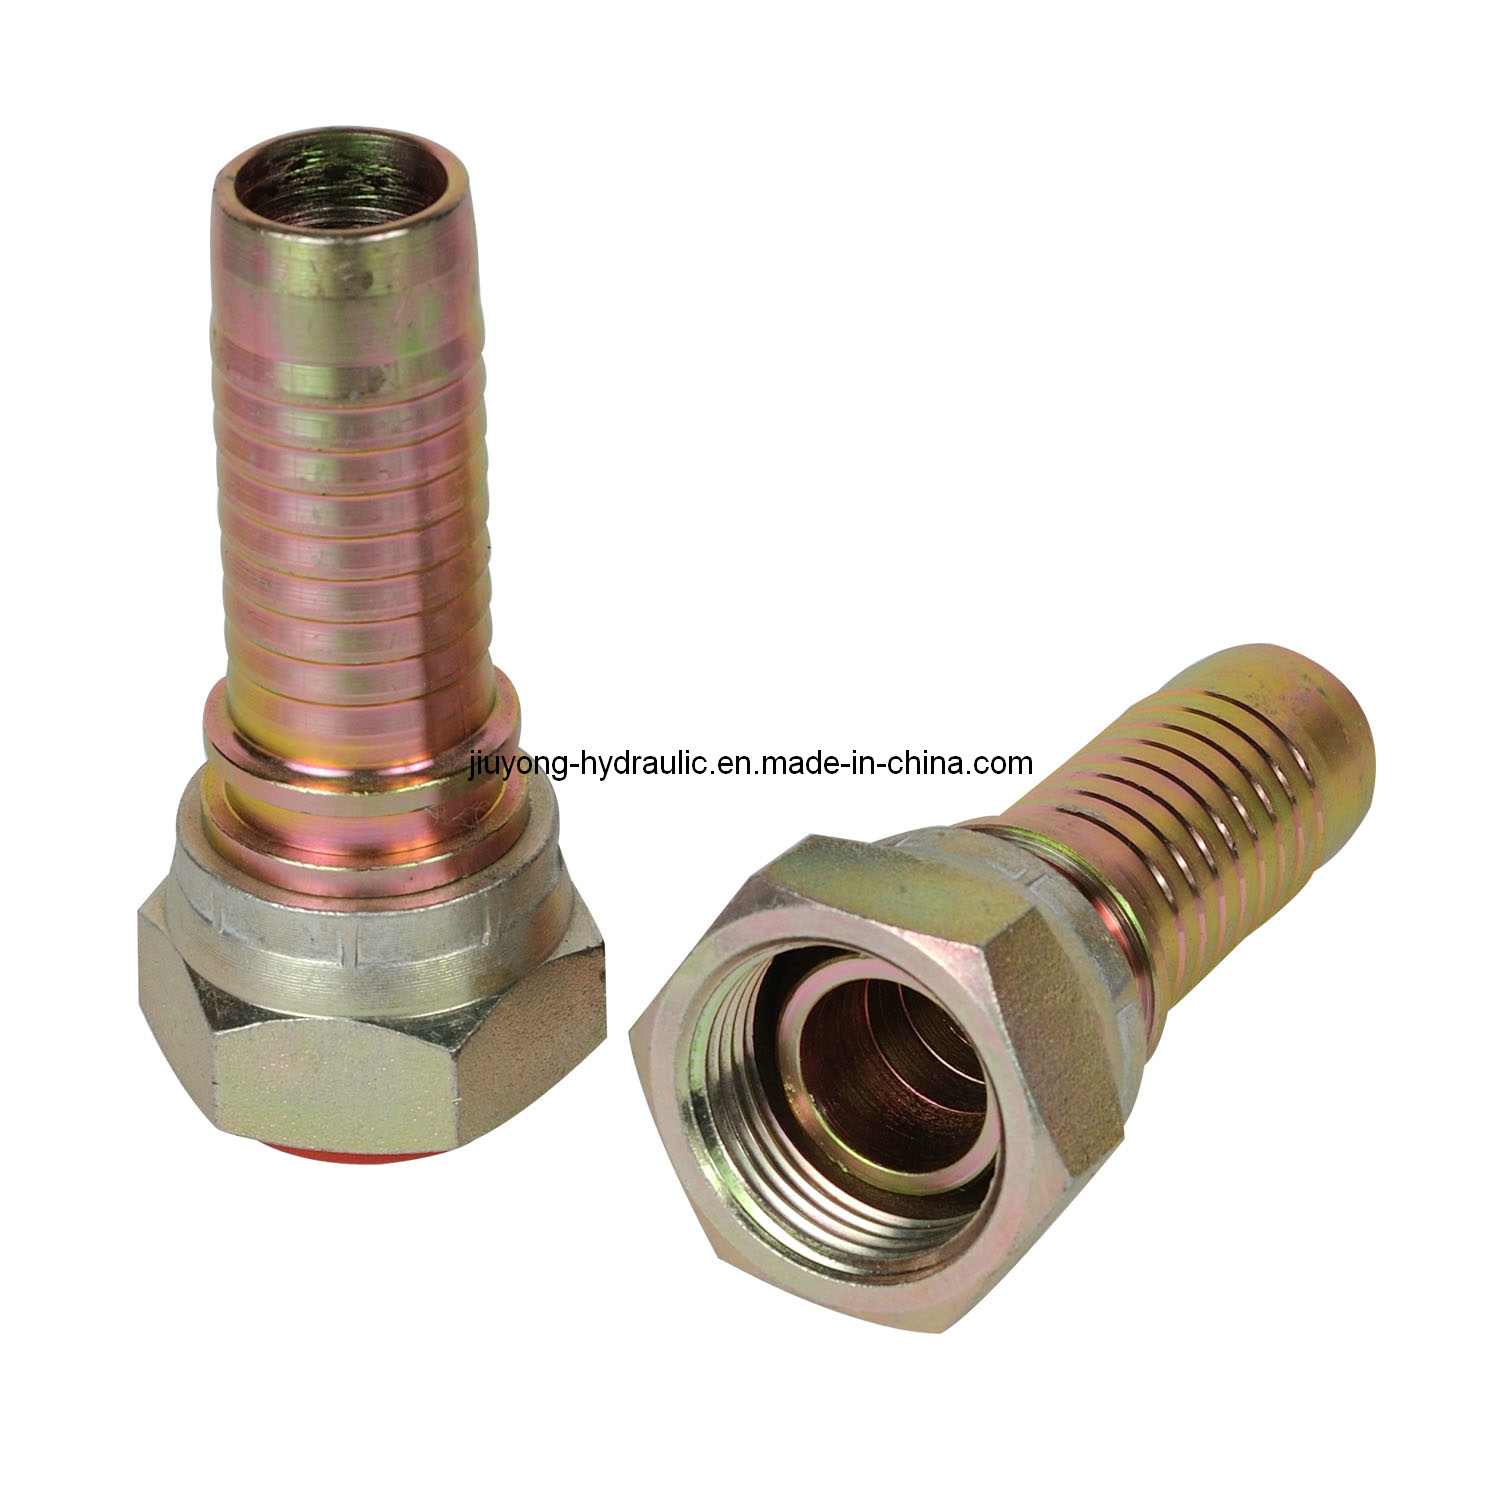 Hose Connector Hydraulic Fitting (22111 BSP Multiseal)